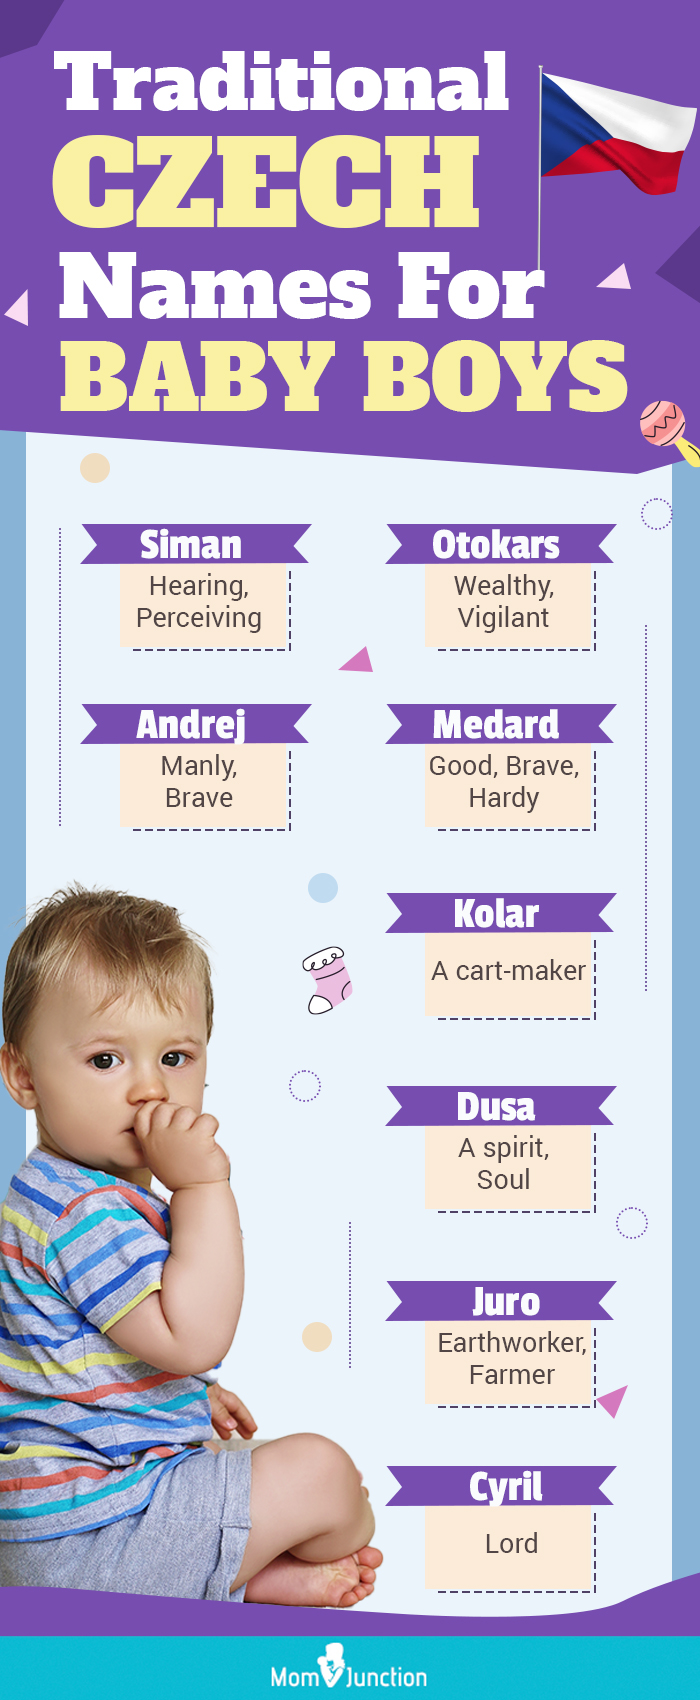 traditional czech names for baby boys (infographic)